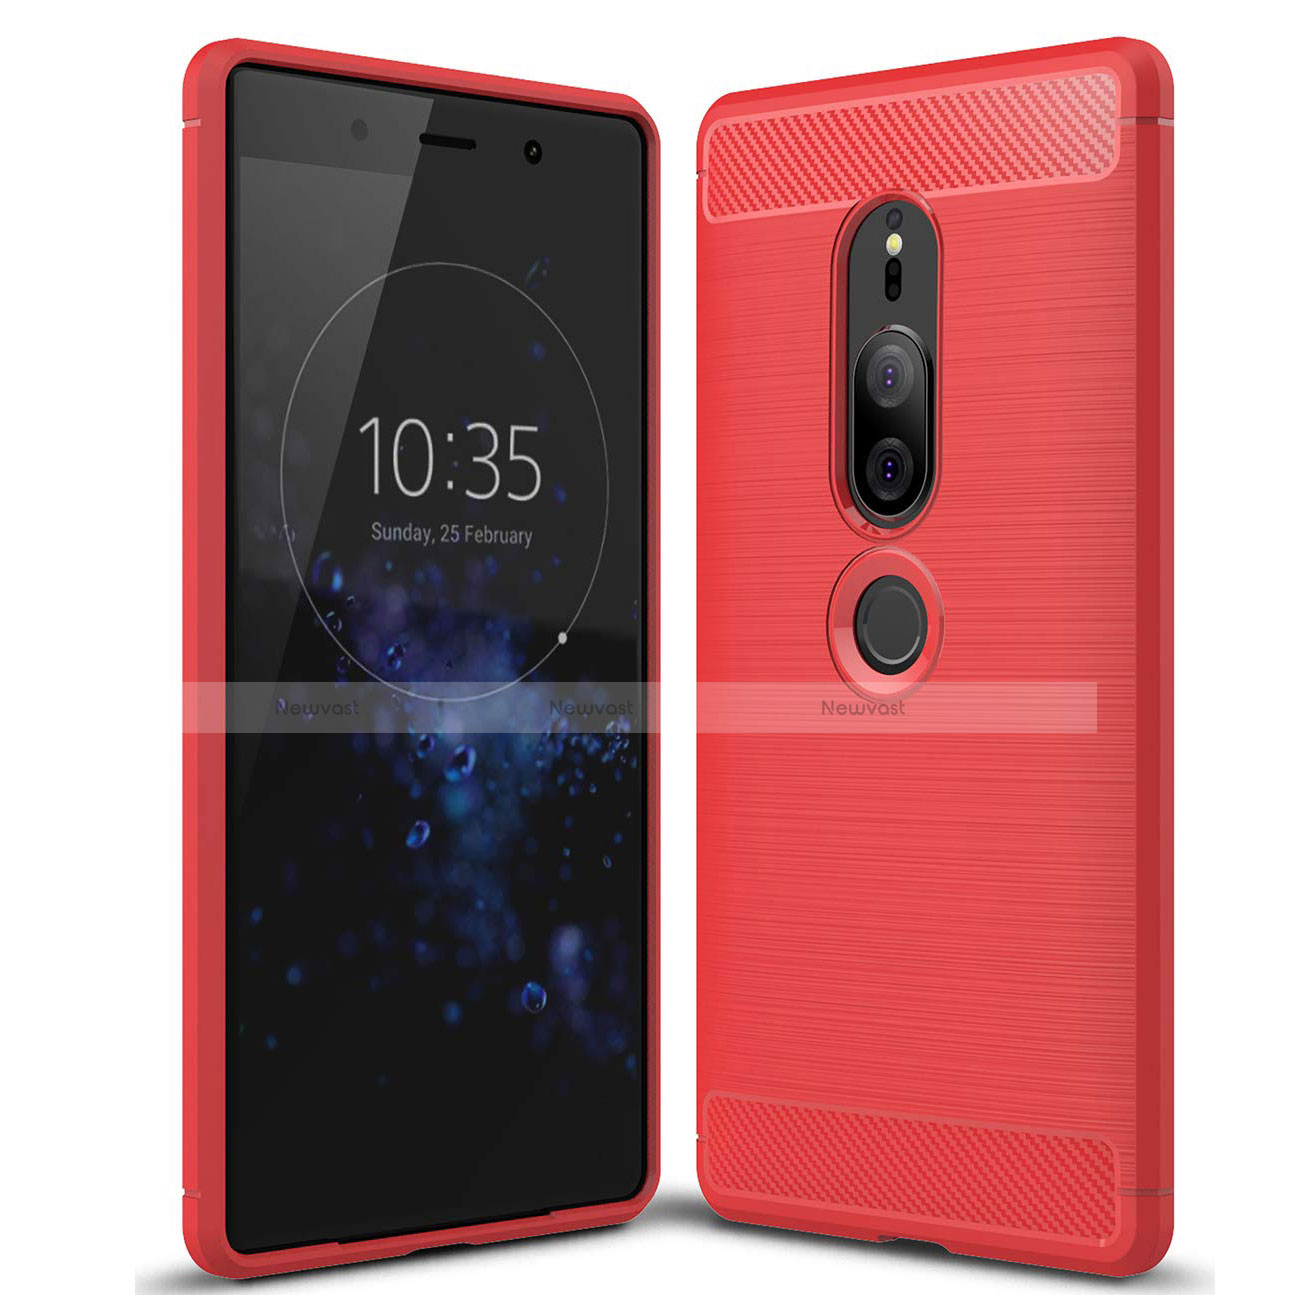 Silicone Candy Rubber TPU Twill Soft Case Cover for Sony Xperia XZ2 Premium Red